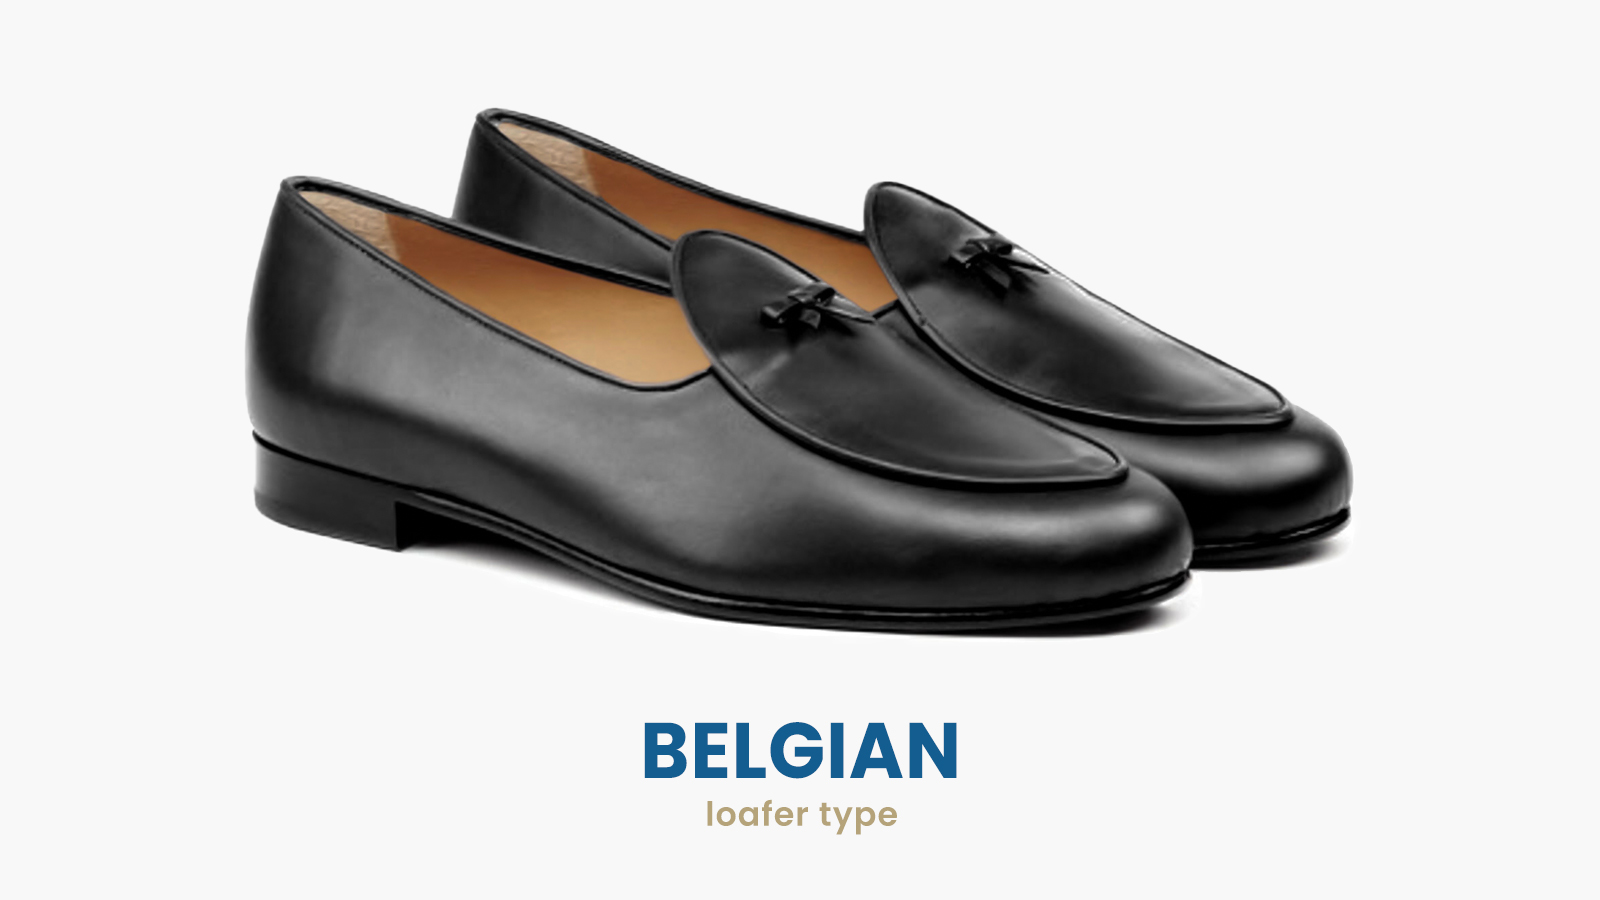 Belgian loafer style